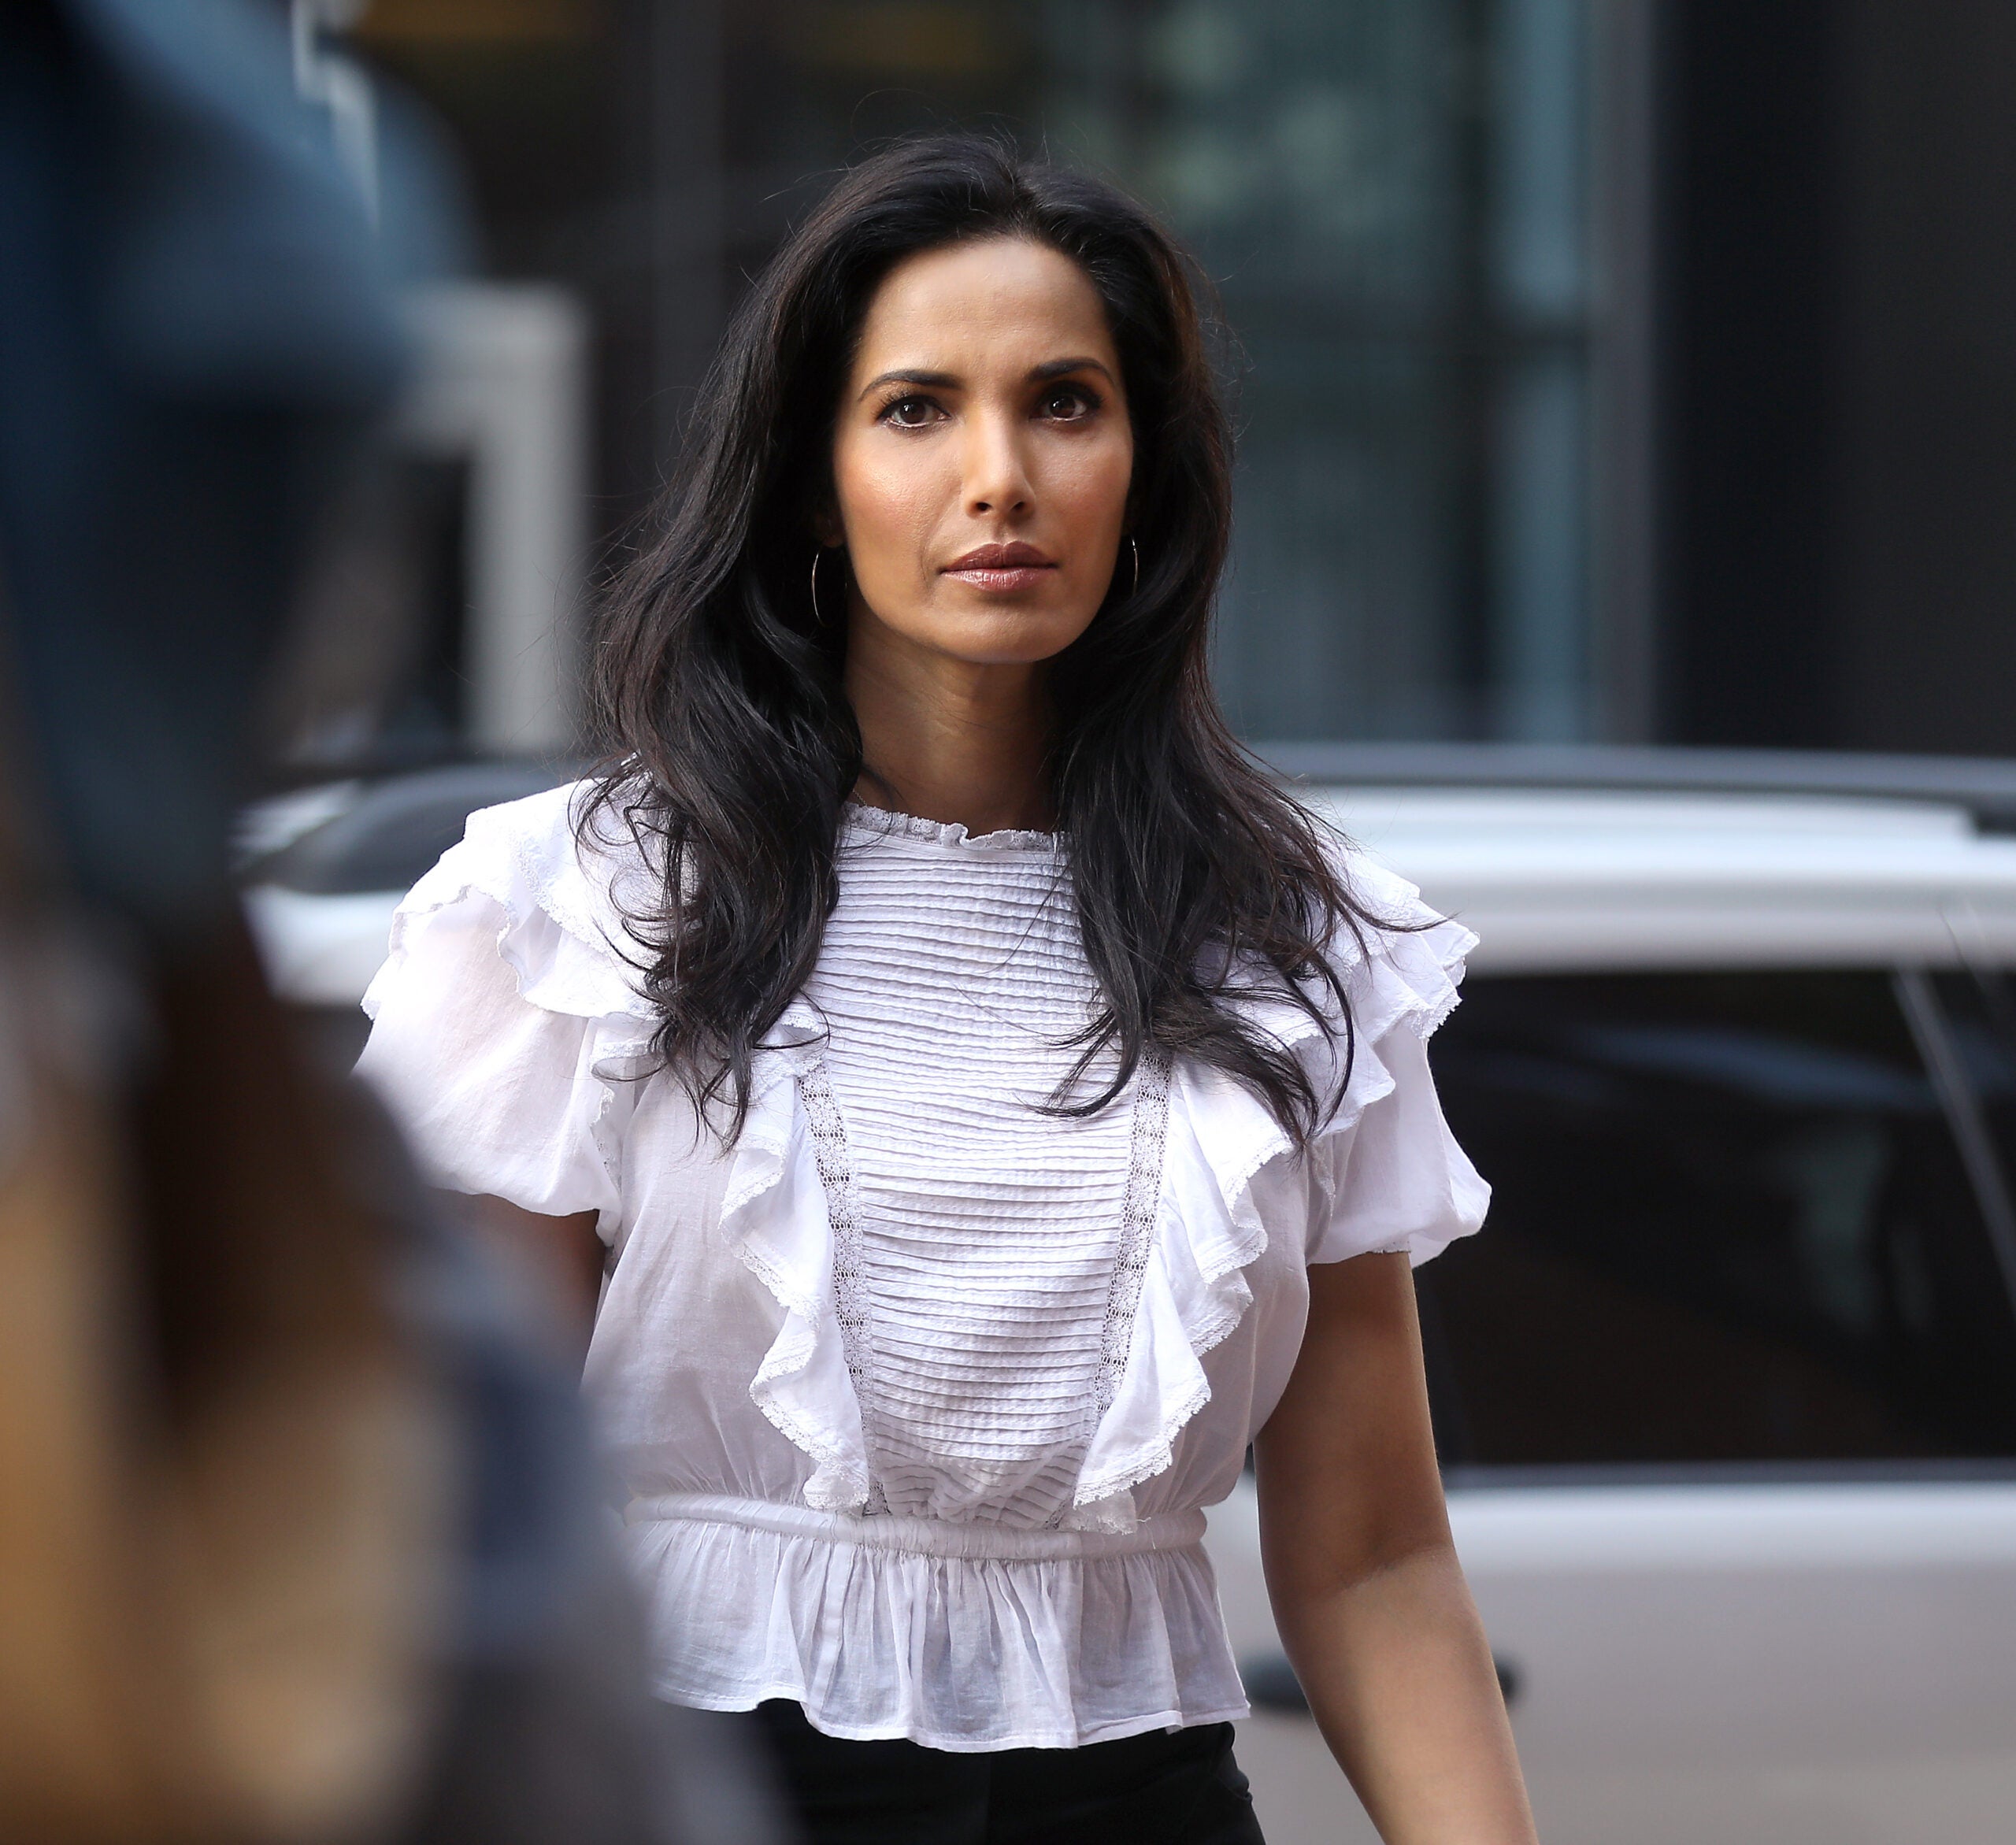 How Boston Teamsters allegedly bullied Padma Lakshmi and the 'Top Chef' staff